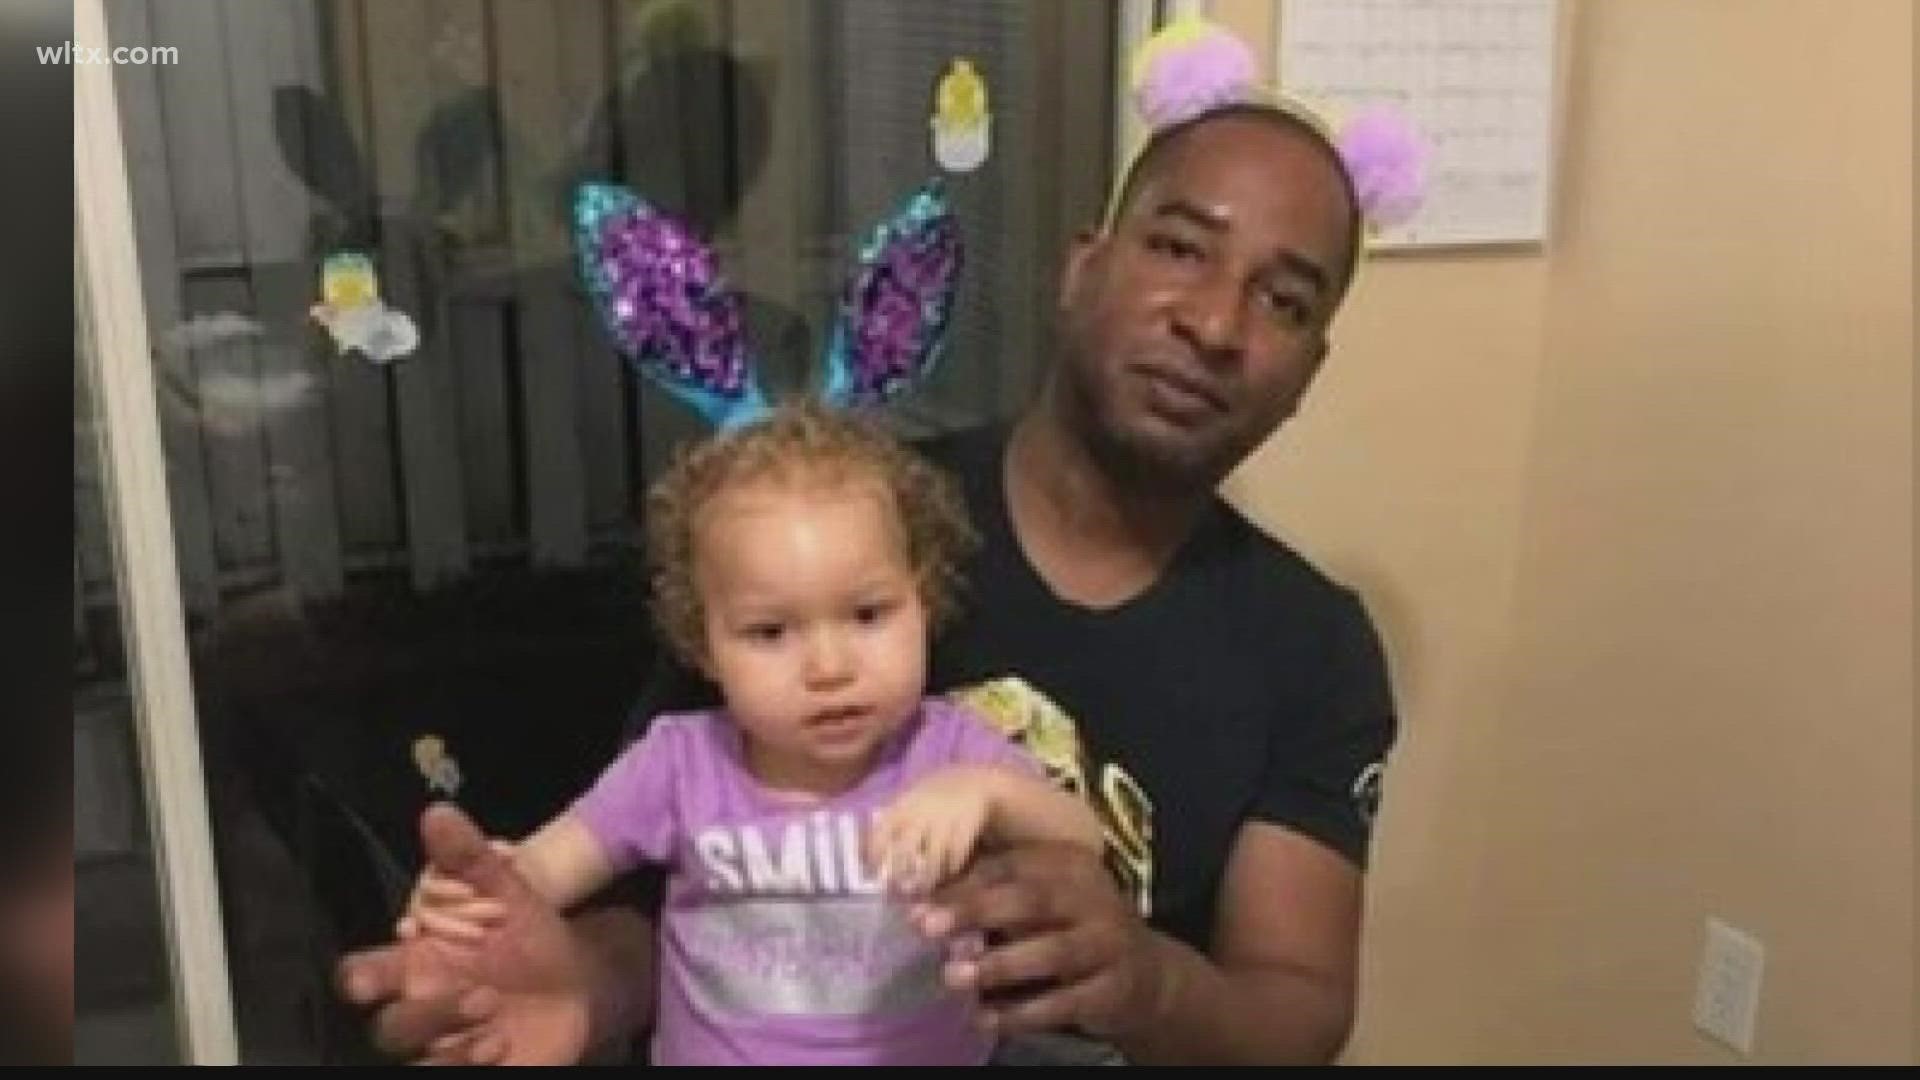 On Thanksgiving Day, Orangeburg County deputies found 46-year-old Crystal Jumper dead with her 5-year-old daughter Aspen and her car nowhere to be found.